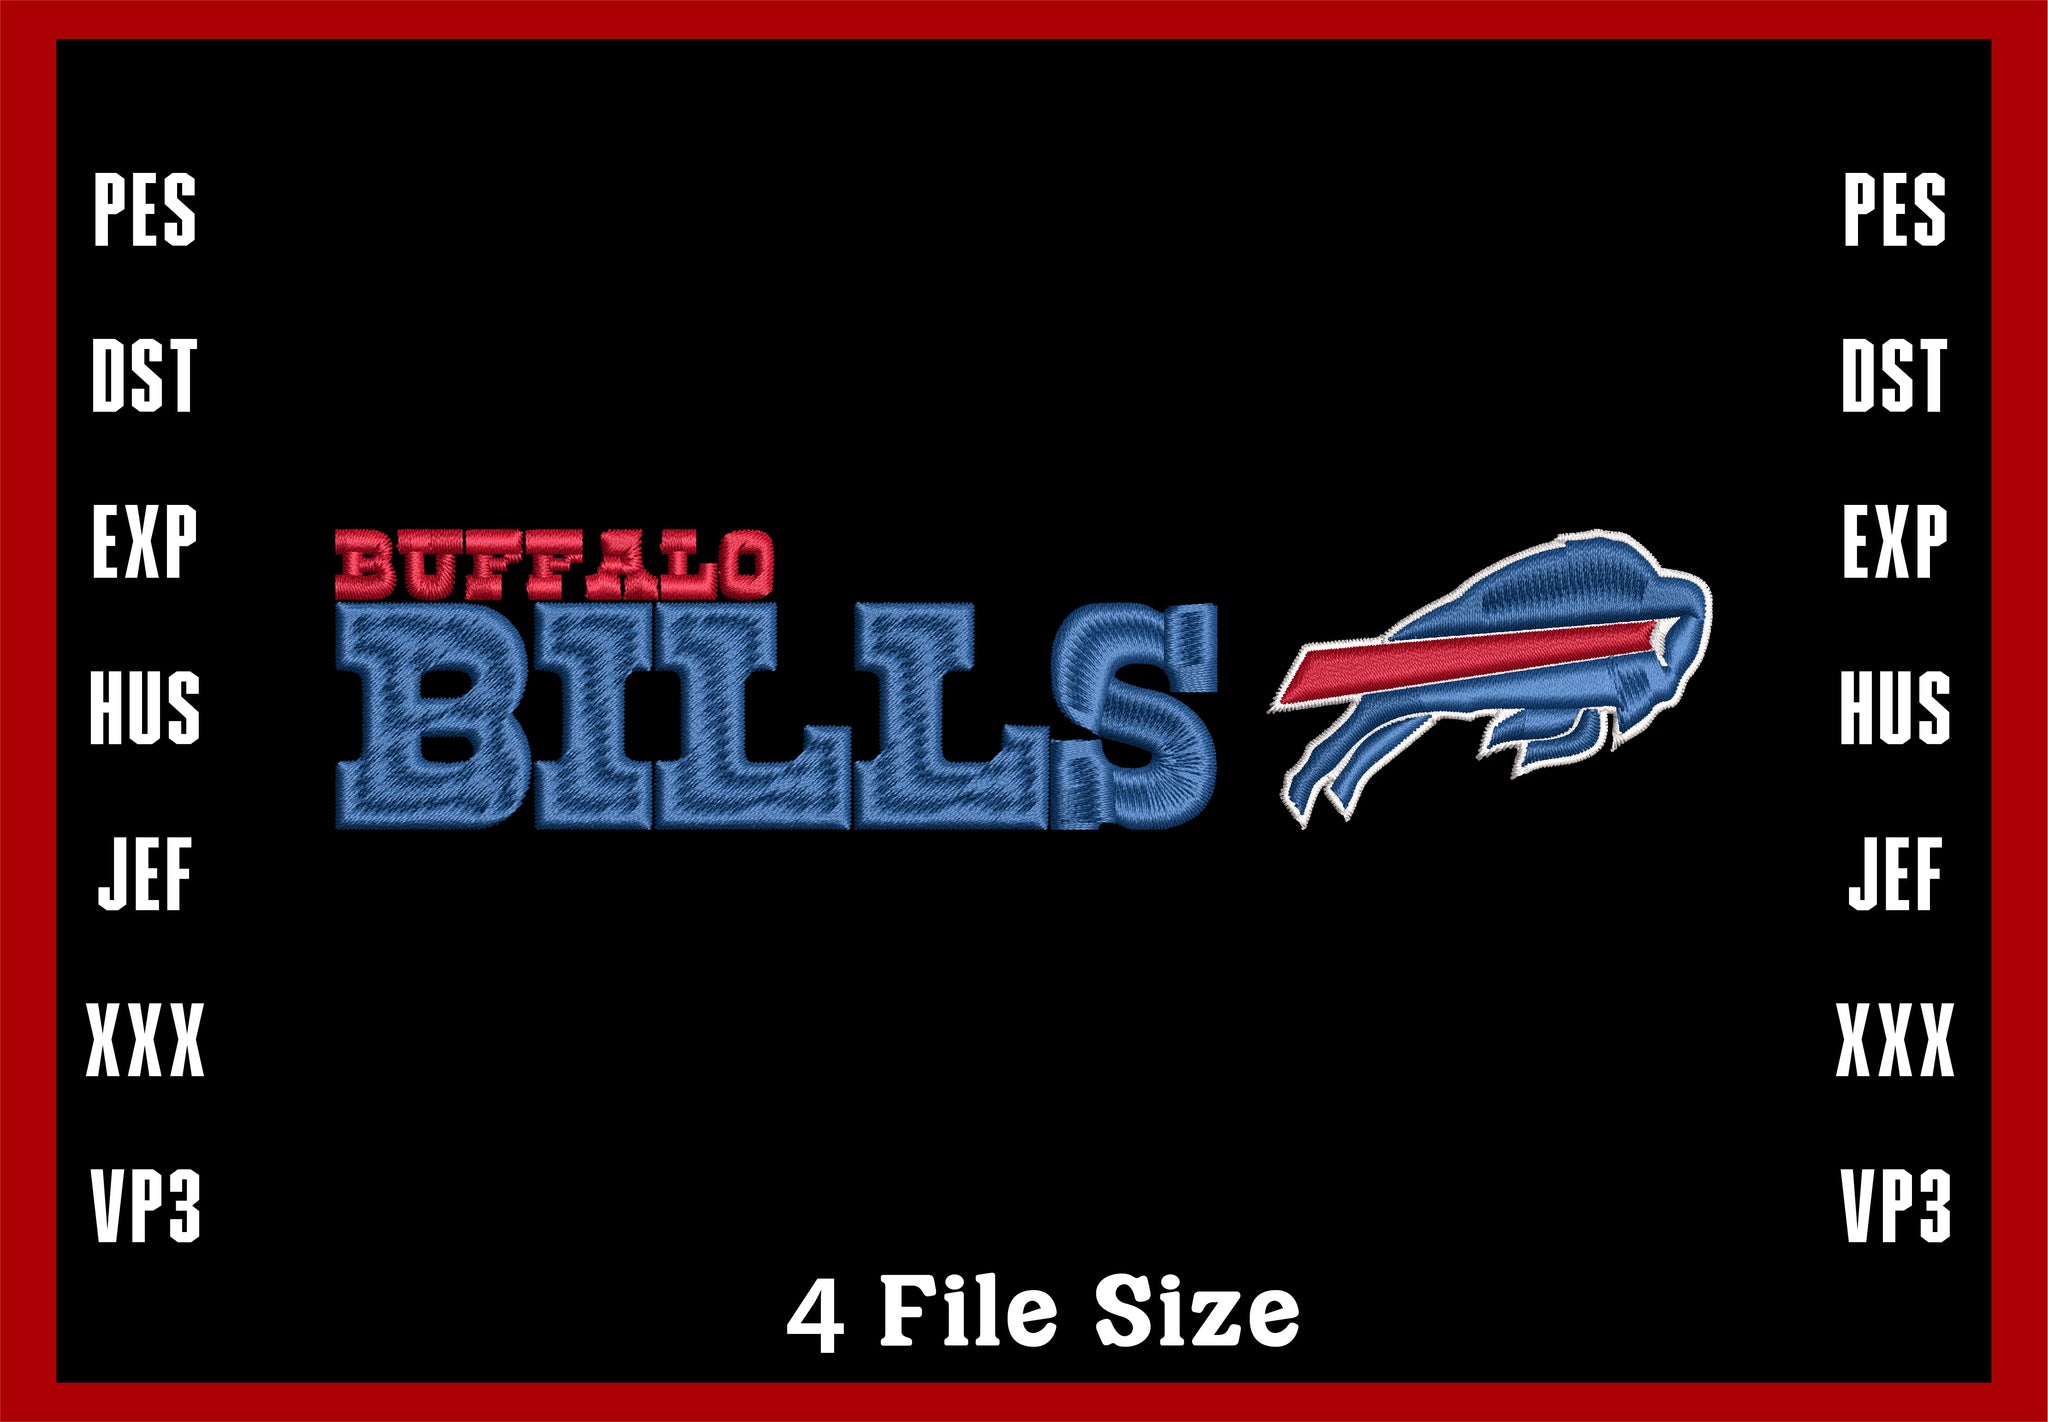 Buffalo Bills Logo Embroidery, NFL football embroidery, Machine Embroidery Design, 4 File sizes- Instant Download & PDF File